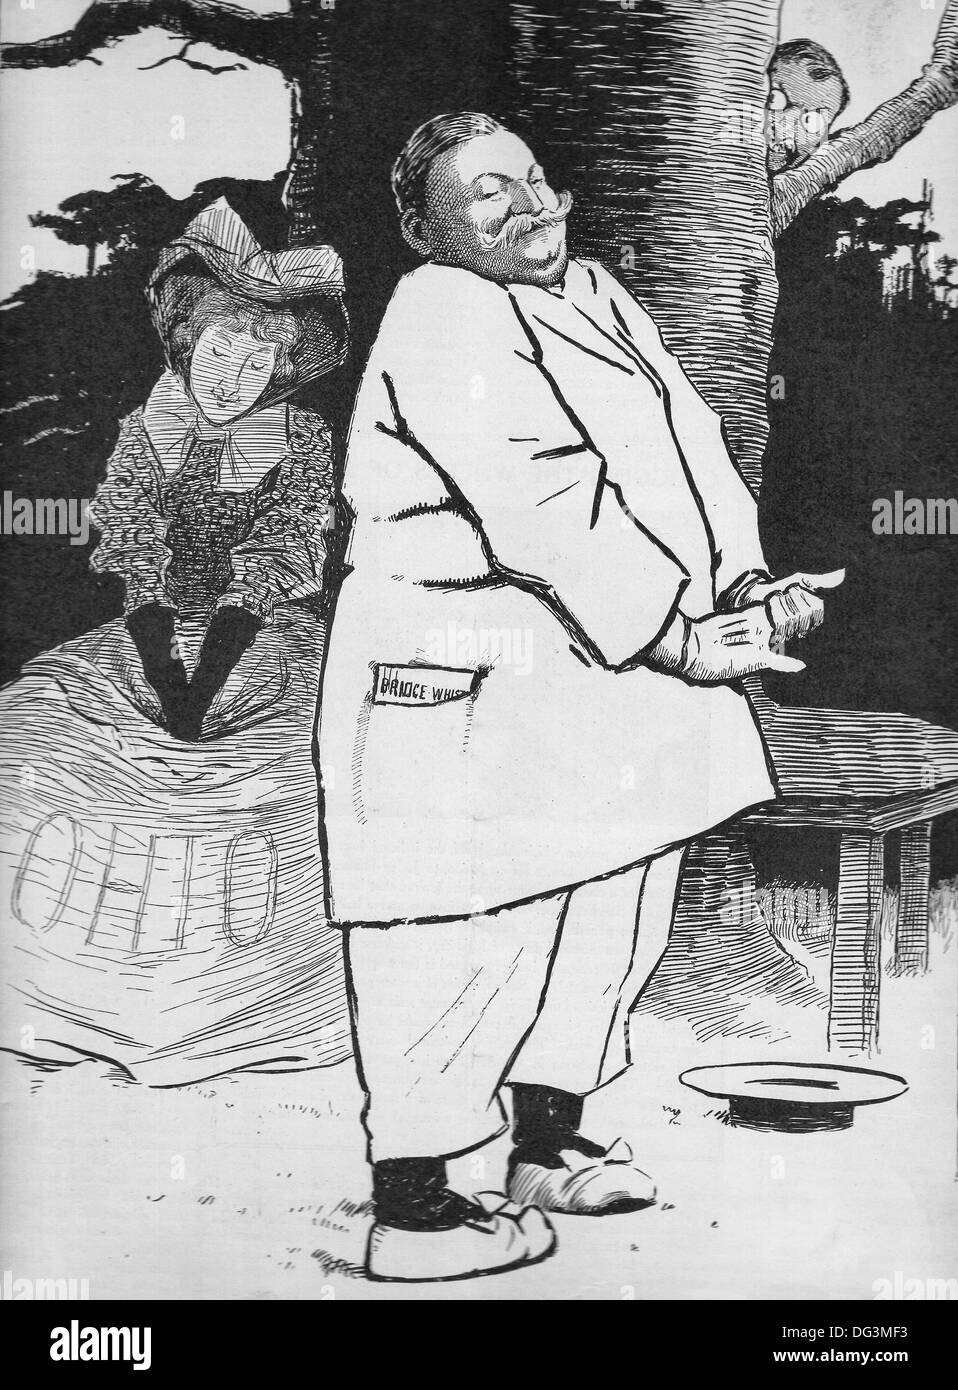 Tongue Tied - Political cartoon showing William Taft behaving shyly around a girl representing Ohio - 1907 Stock Photo